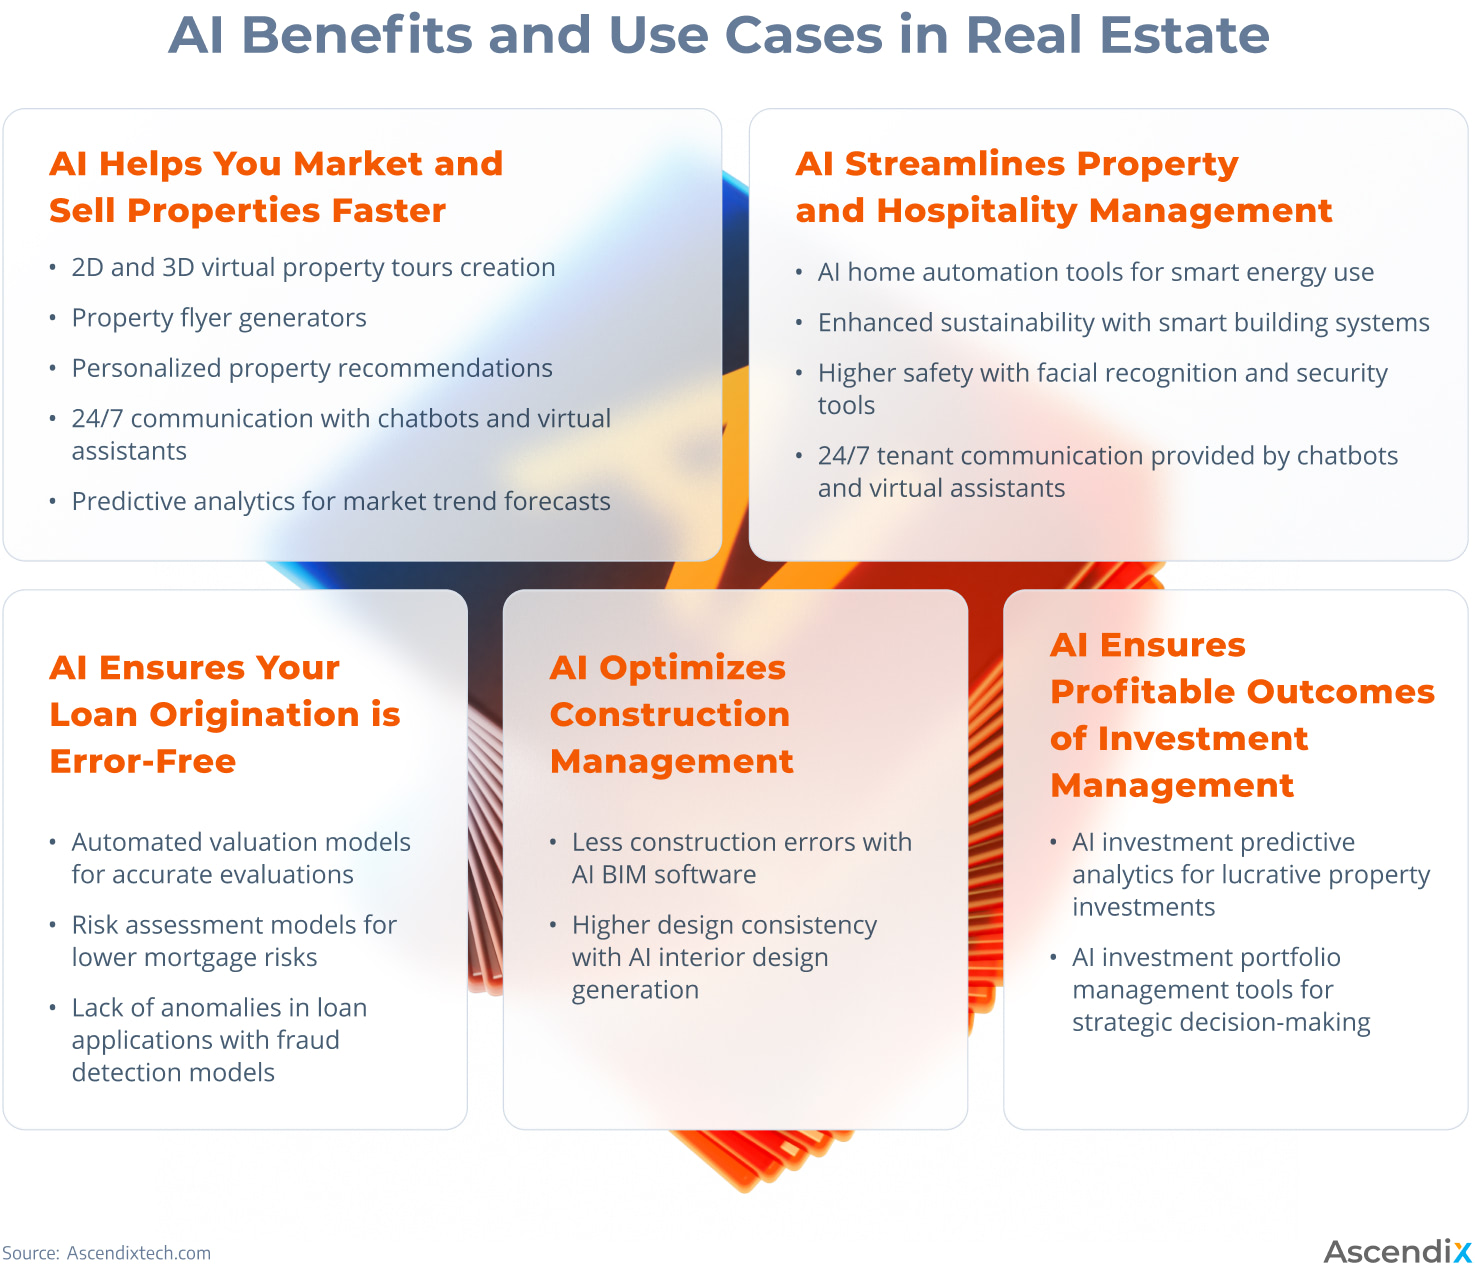 AI Benefits and Use Cases in Real Estate